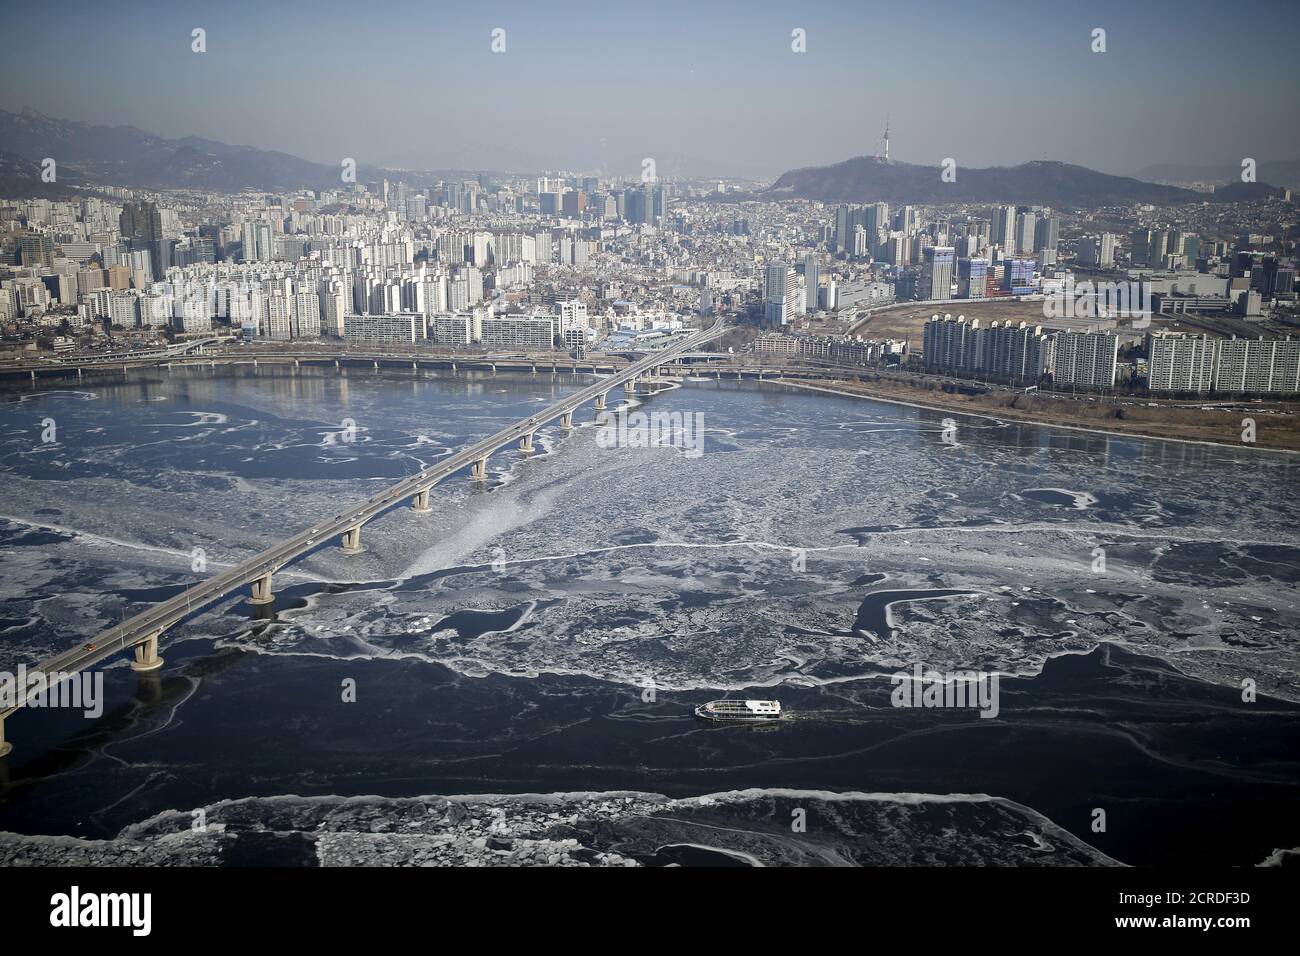 A passenger ship (bottom) navigates through the ice flow in the Han River in Seoul, South Korea, January 25, 2016. A cold snap hit South Korea on Sunday with the temperature in Seoul falling to minus 18 degree Celsius. REUTERS/Kim Hong-Ji      TPX IMAGES OF THE DAY Stock Photo